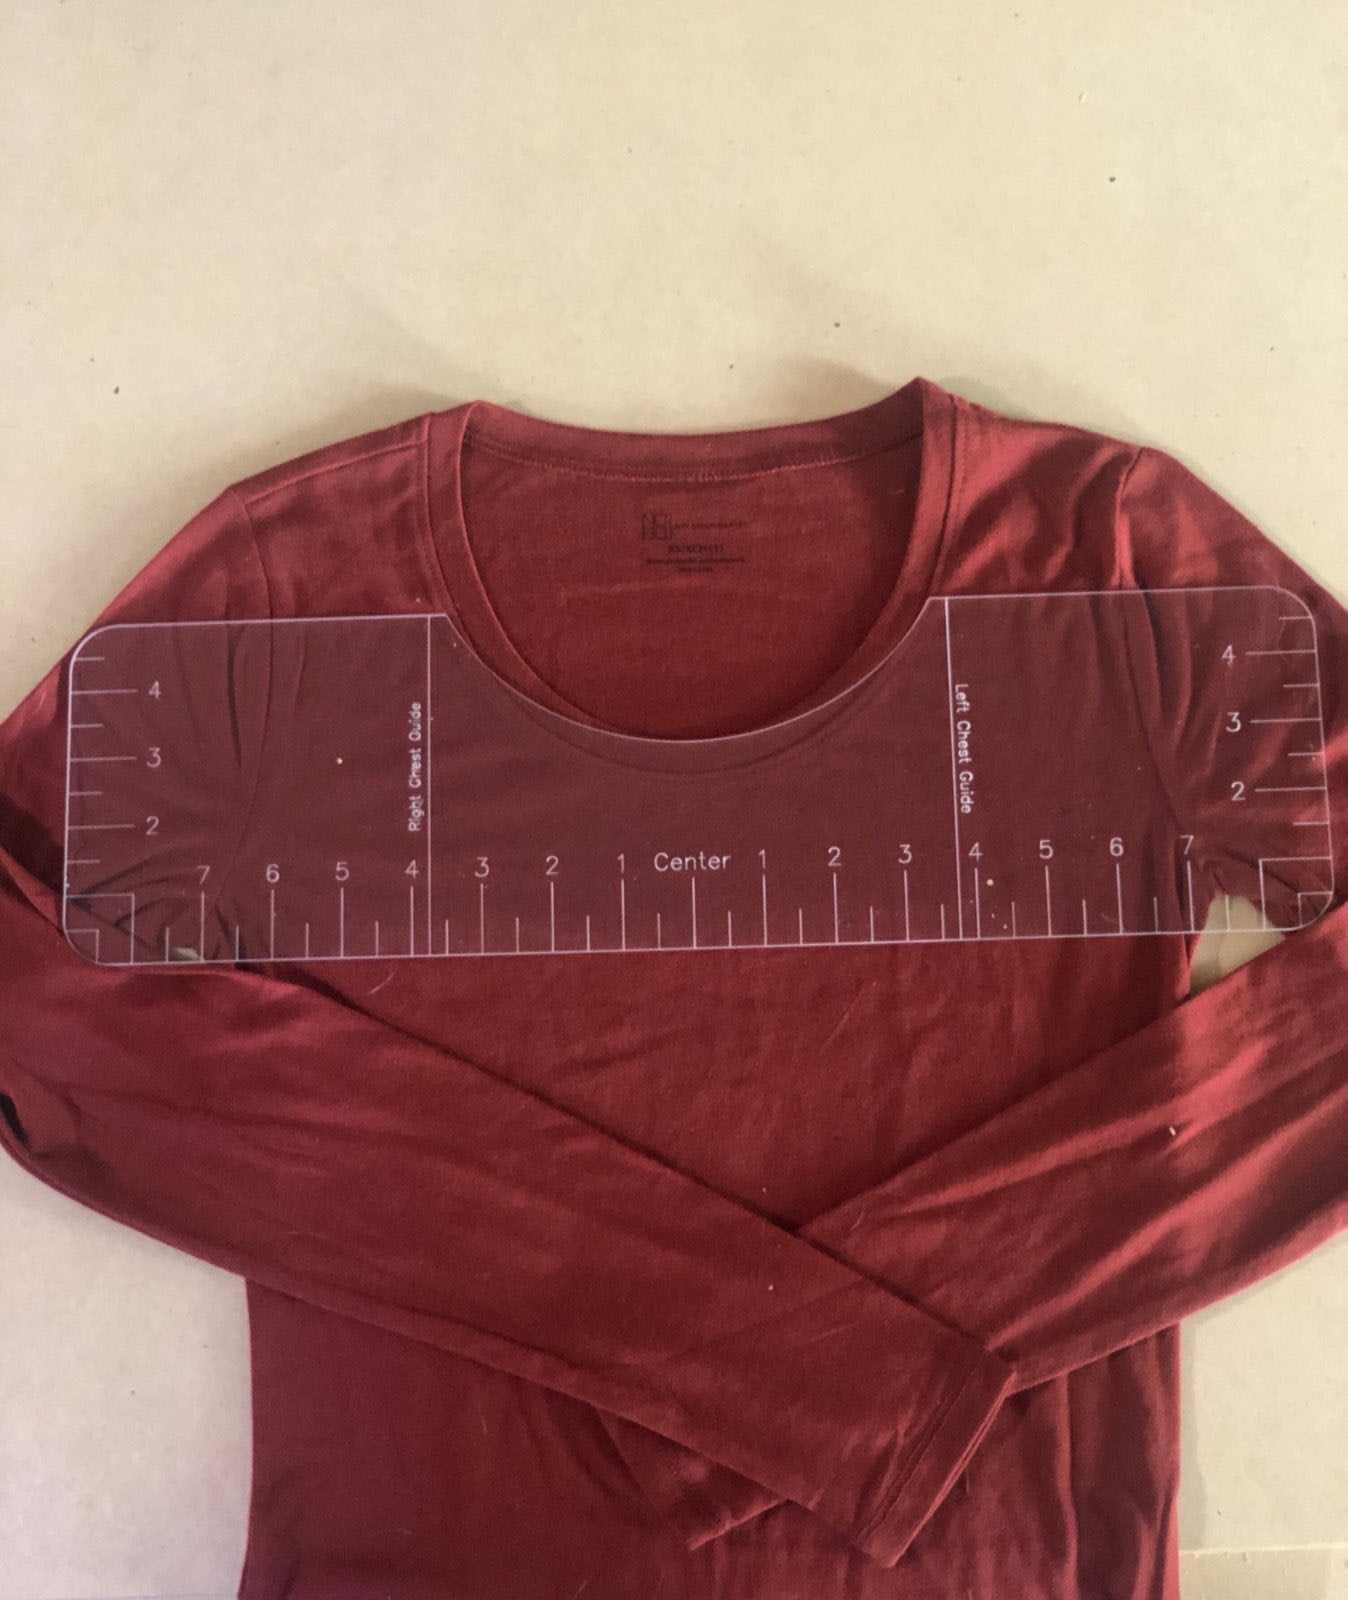 T-Shirt Design Placement Ruler - Align your Designs to your T-Shirt before you Press, the easy way! EASY SHIRT DESIGN alignment tool